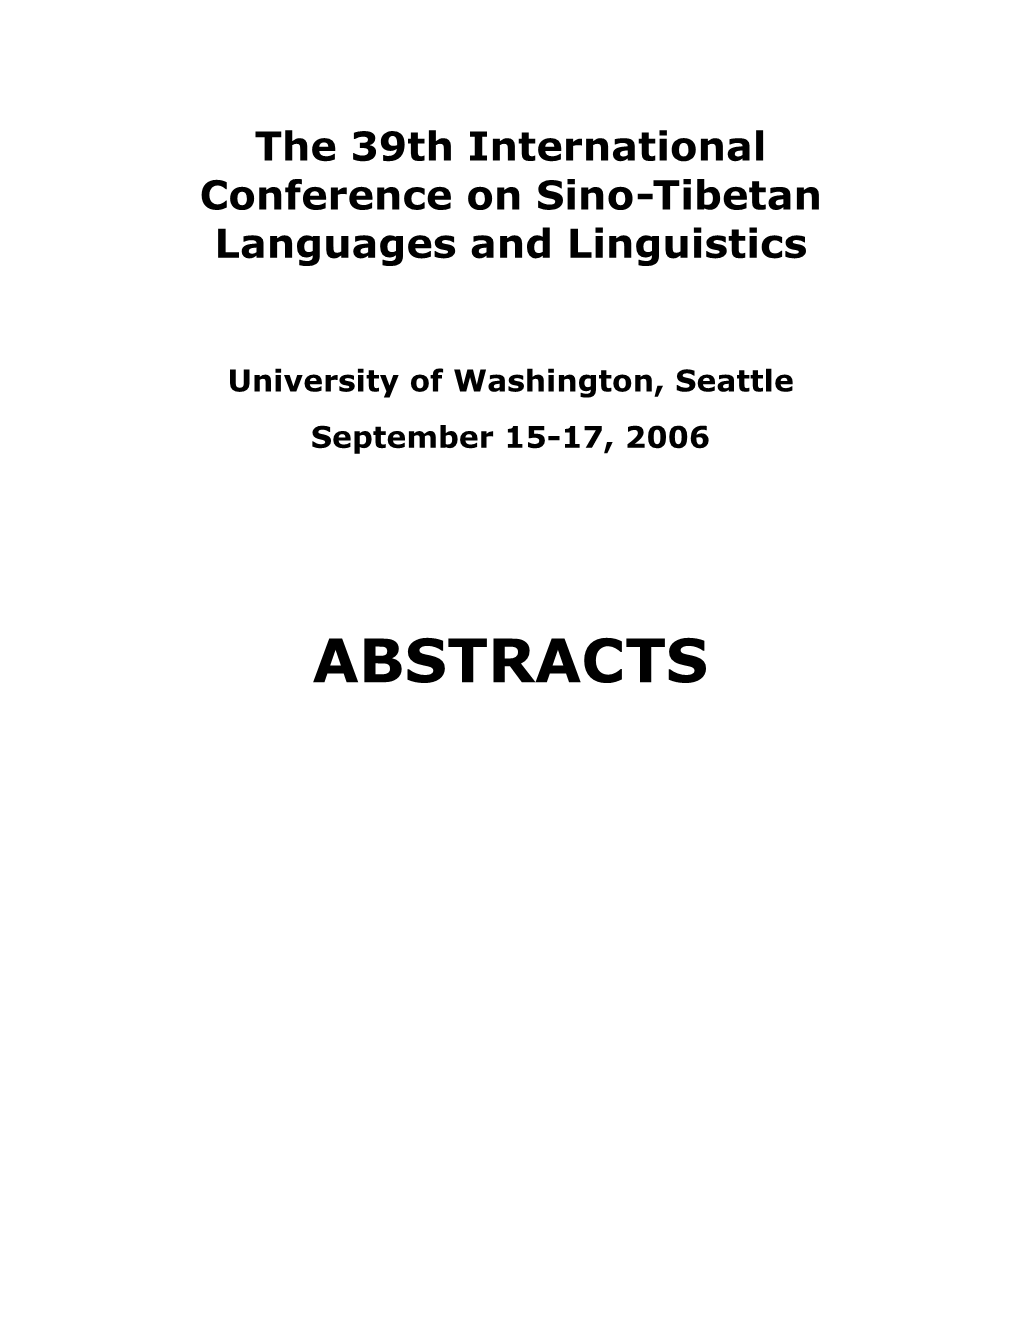 The 39Th International Conference on Sino-Tibetan Languages and Linguistics